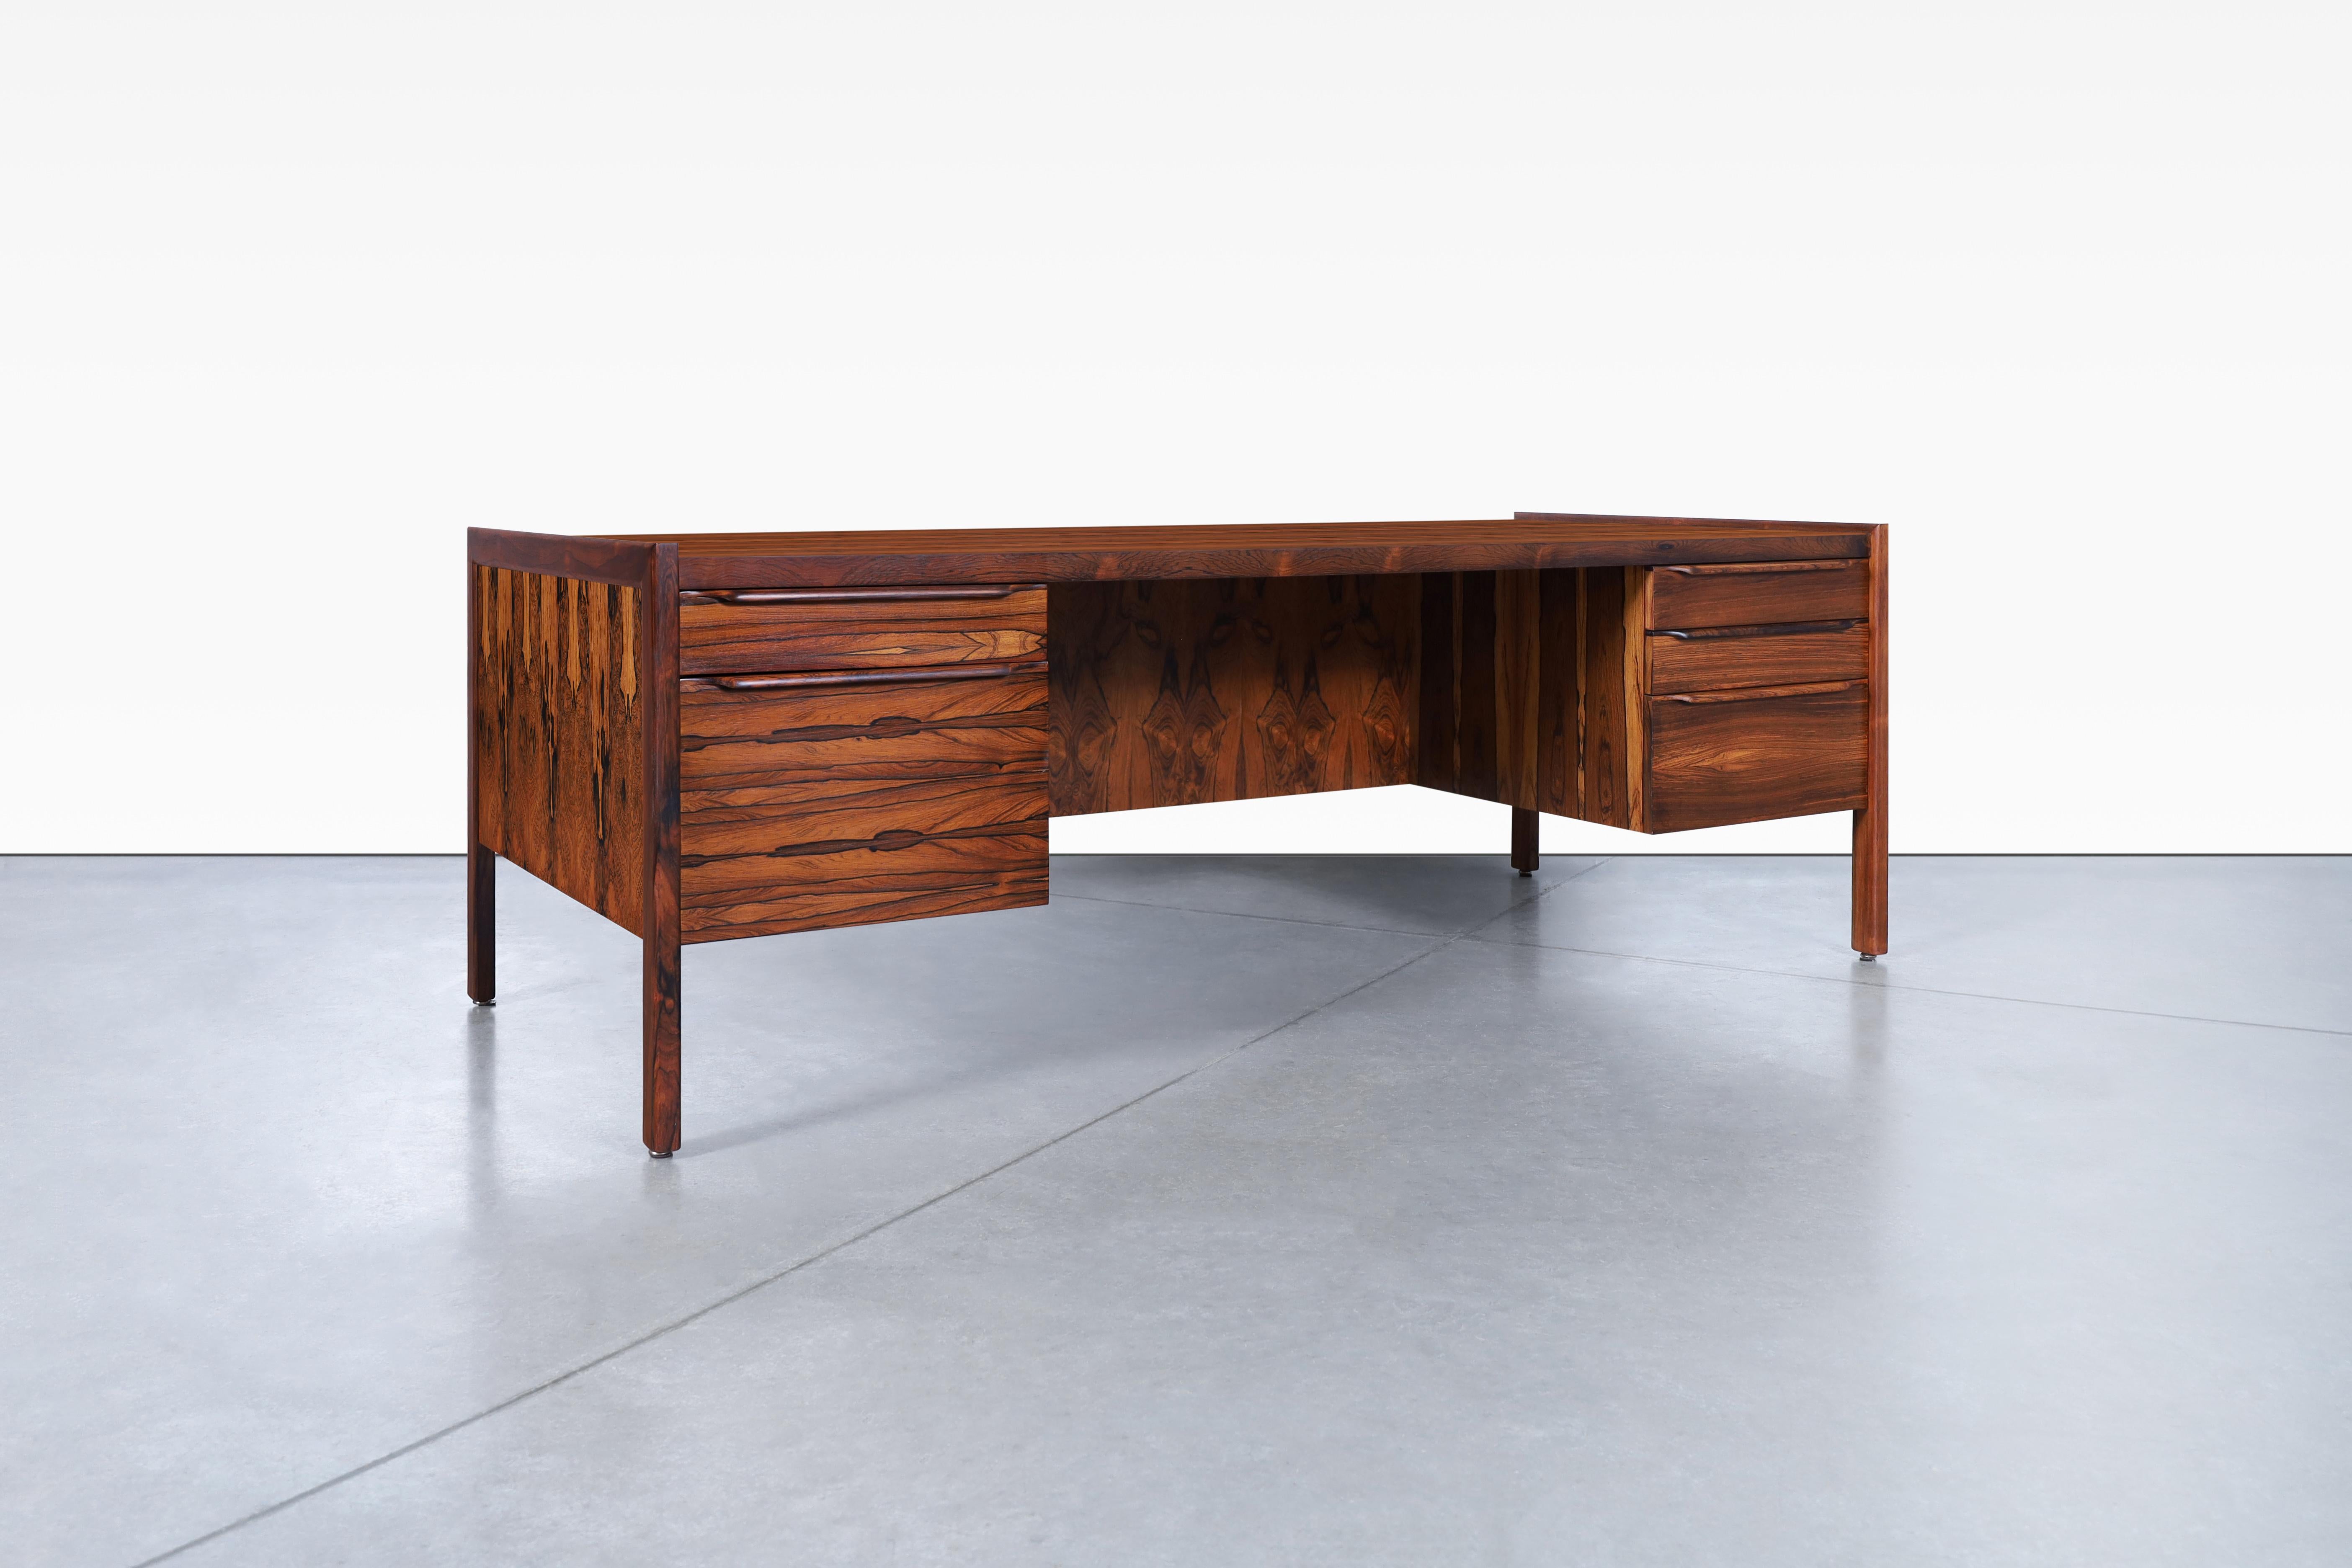 Stunning Danish modern executive rosewood desk designed in Denmark, circa 1960’s. This large version of the rosewood desk has been carefully refinished to reveal its natural beauty and incredible grain. Its stunning design is complemented by